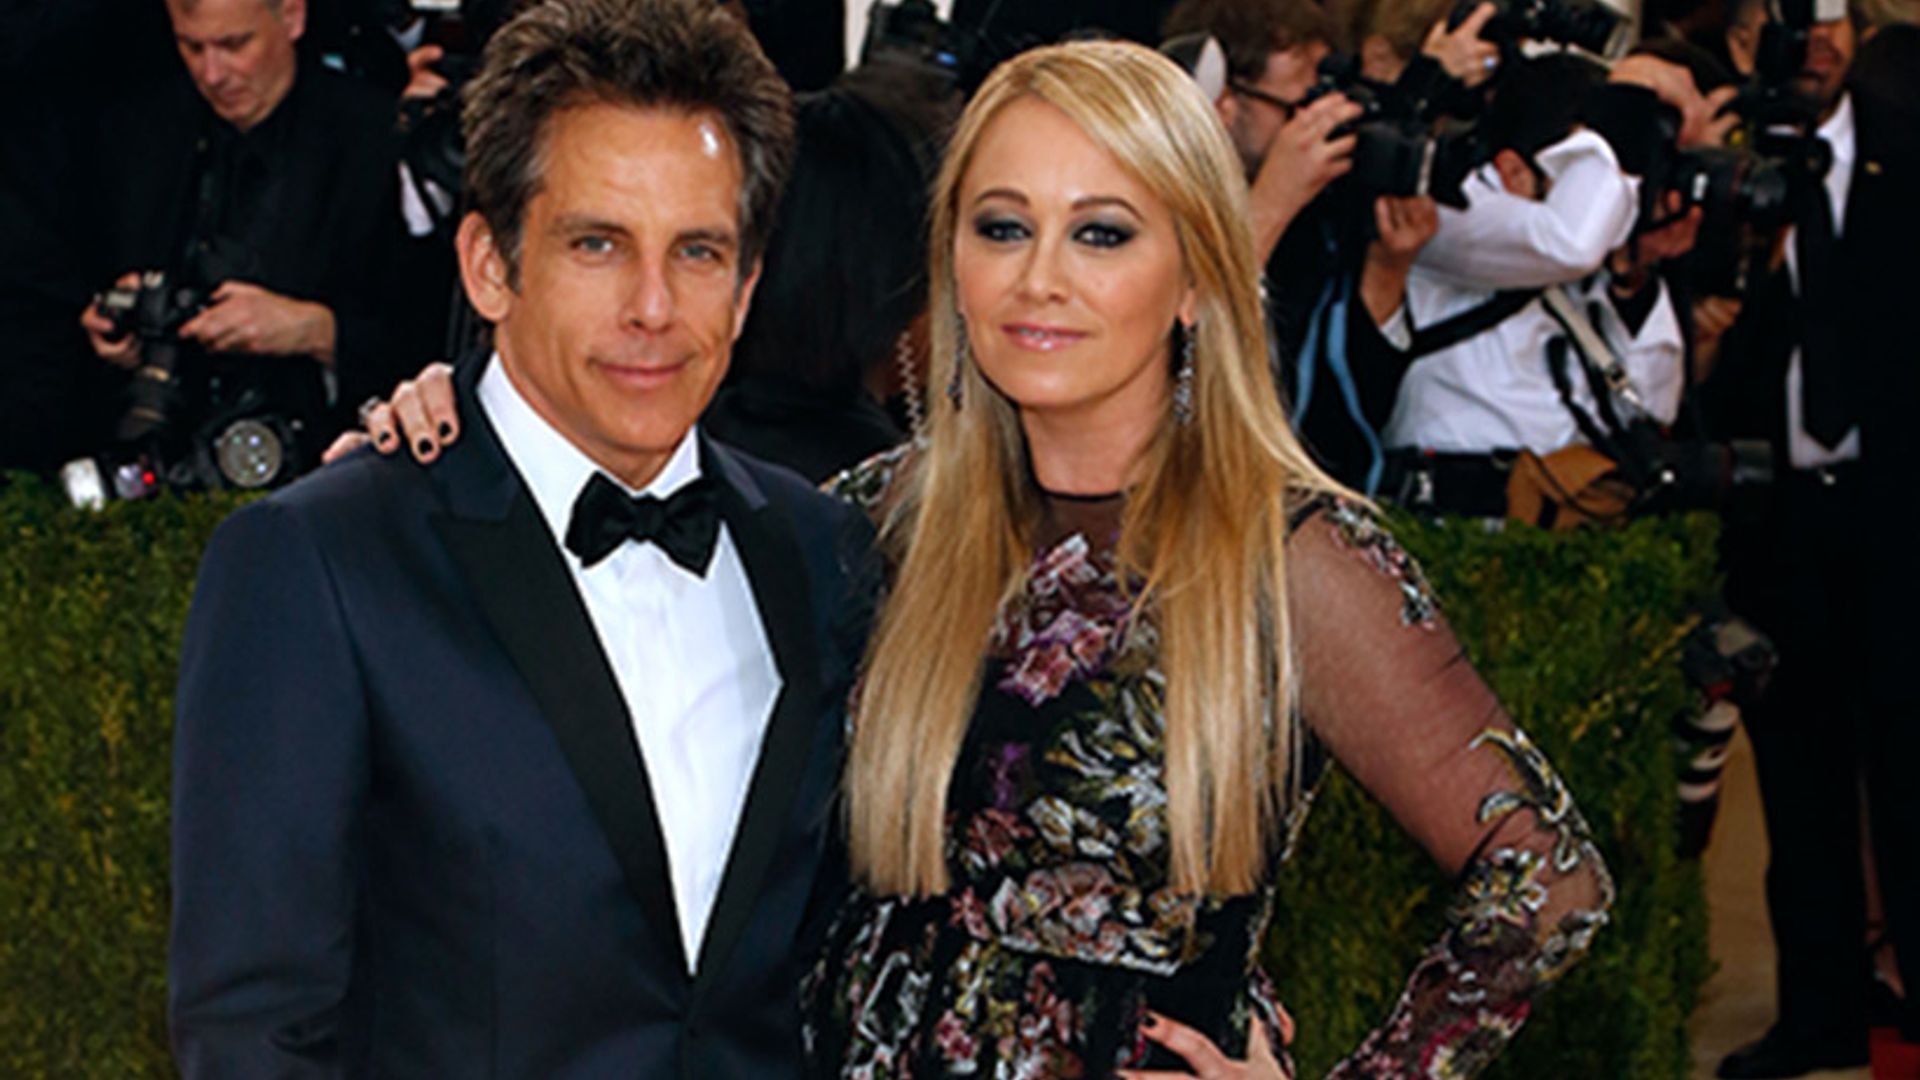 Ben Stiller and wife Christine Taylor split after 17 years of marriage